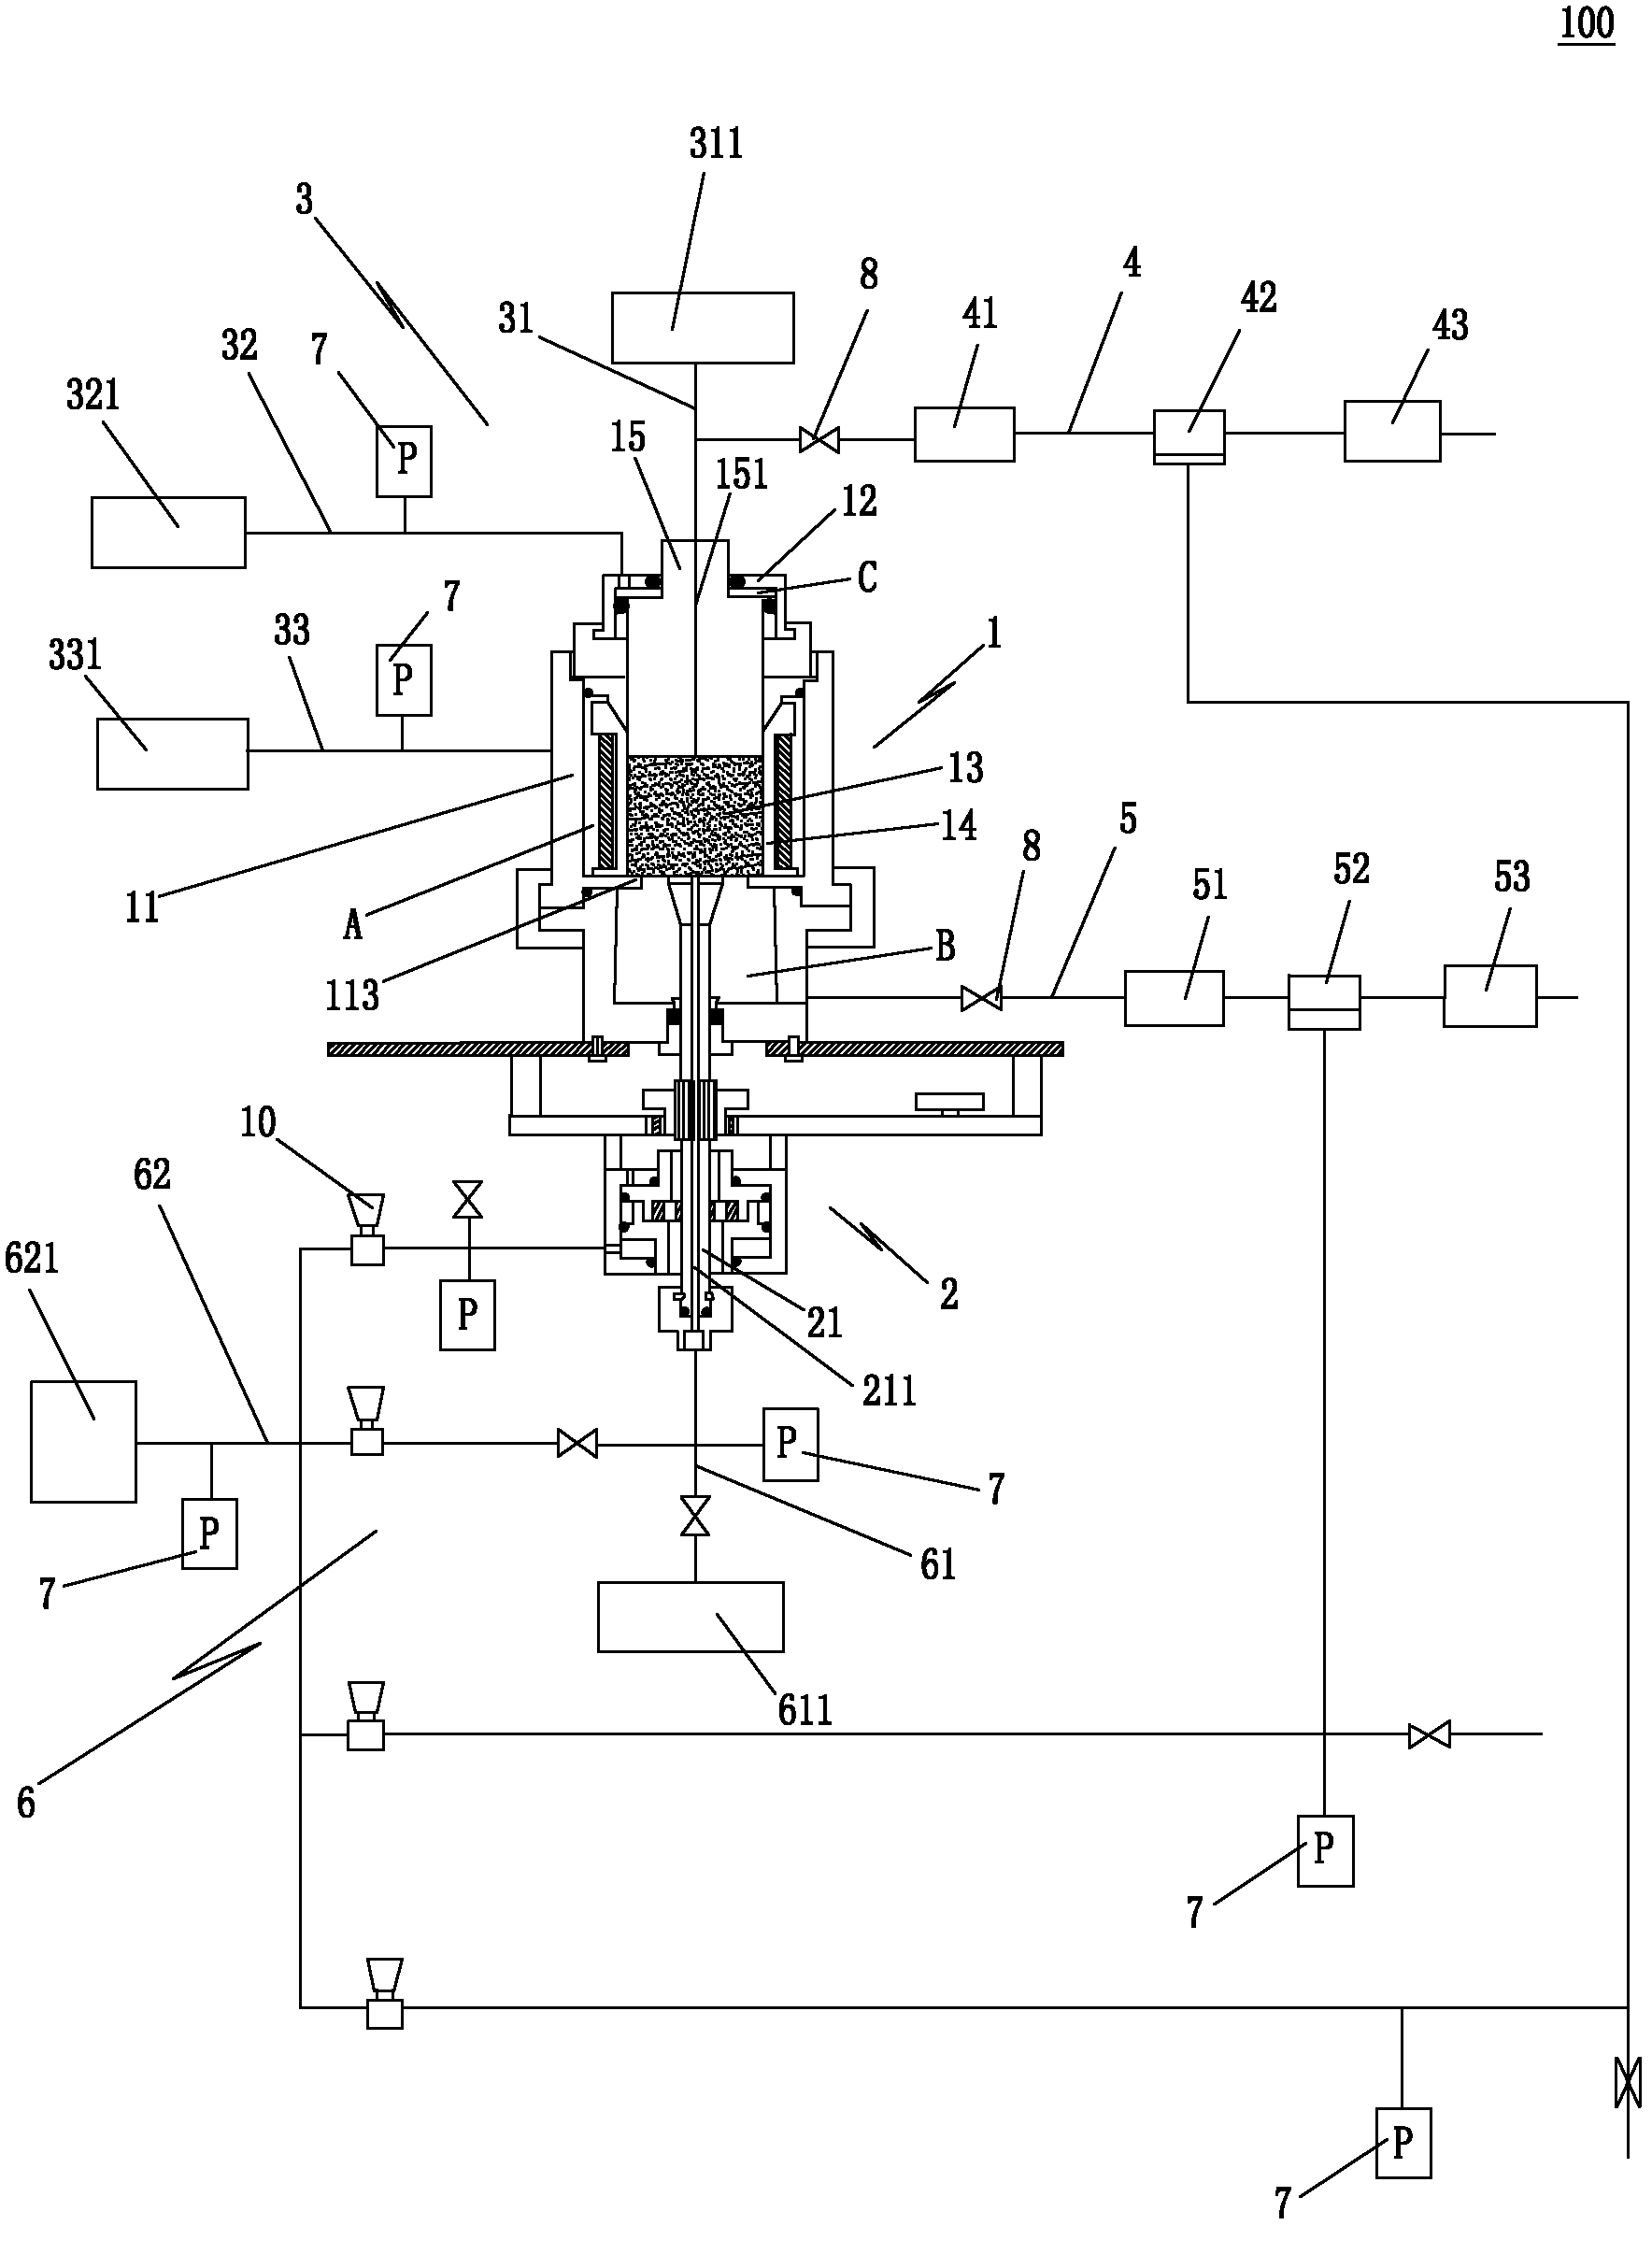 Drilling simulation experiment device